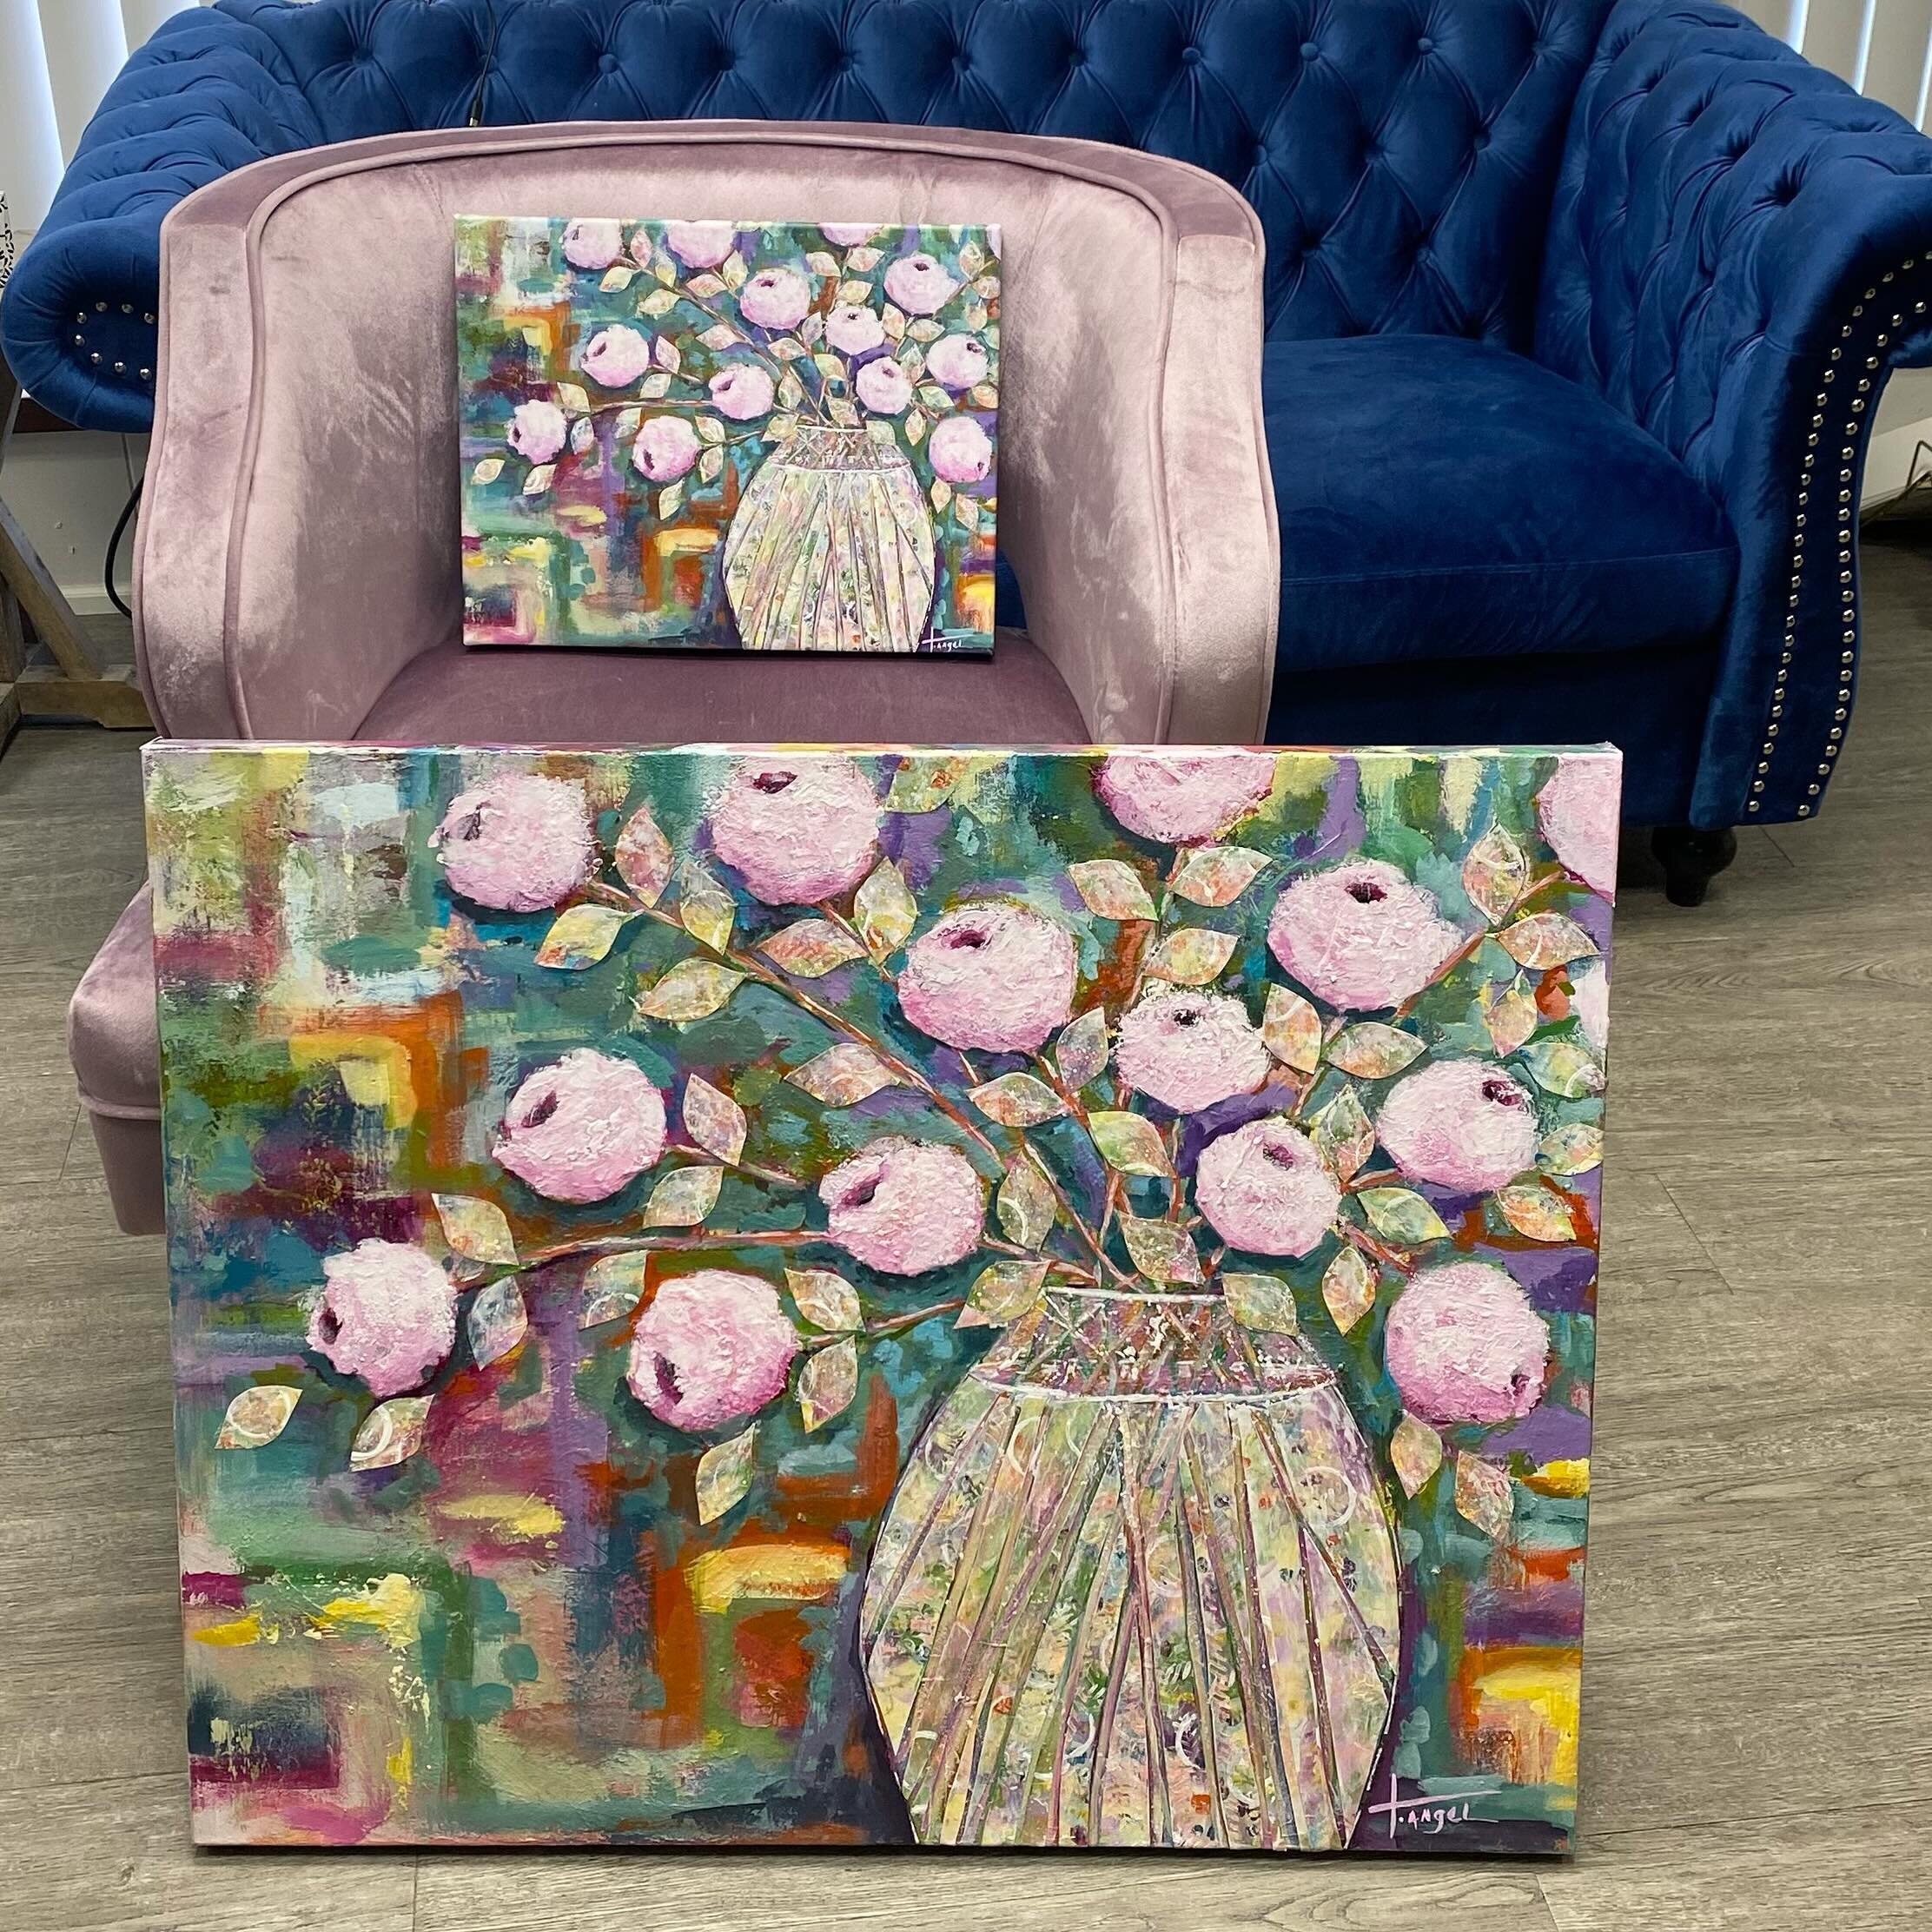 We&rsquo;ve had a BABY!! Momma Canvas Original gave birth to Baby Canvas Print!! She&rsquo;s perfect for a smaller space. Who&rsquo;s gonna take this sweet painting by @tonya_angel_art home?